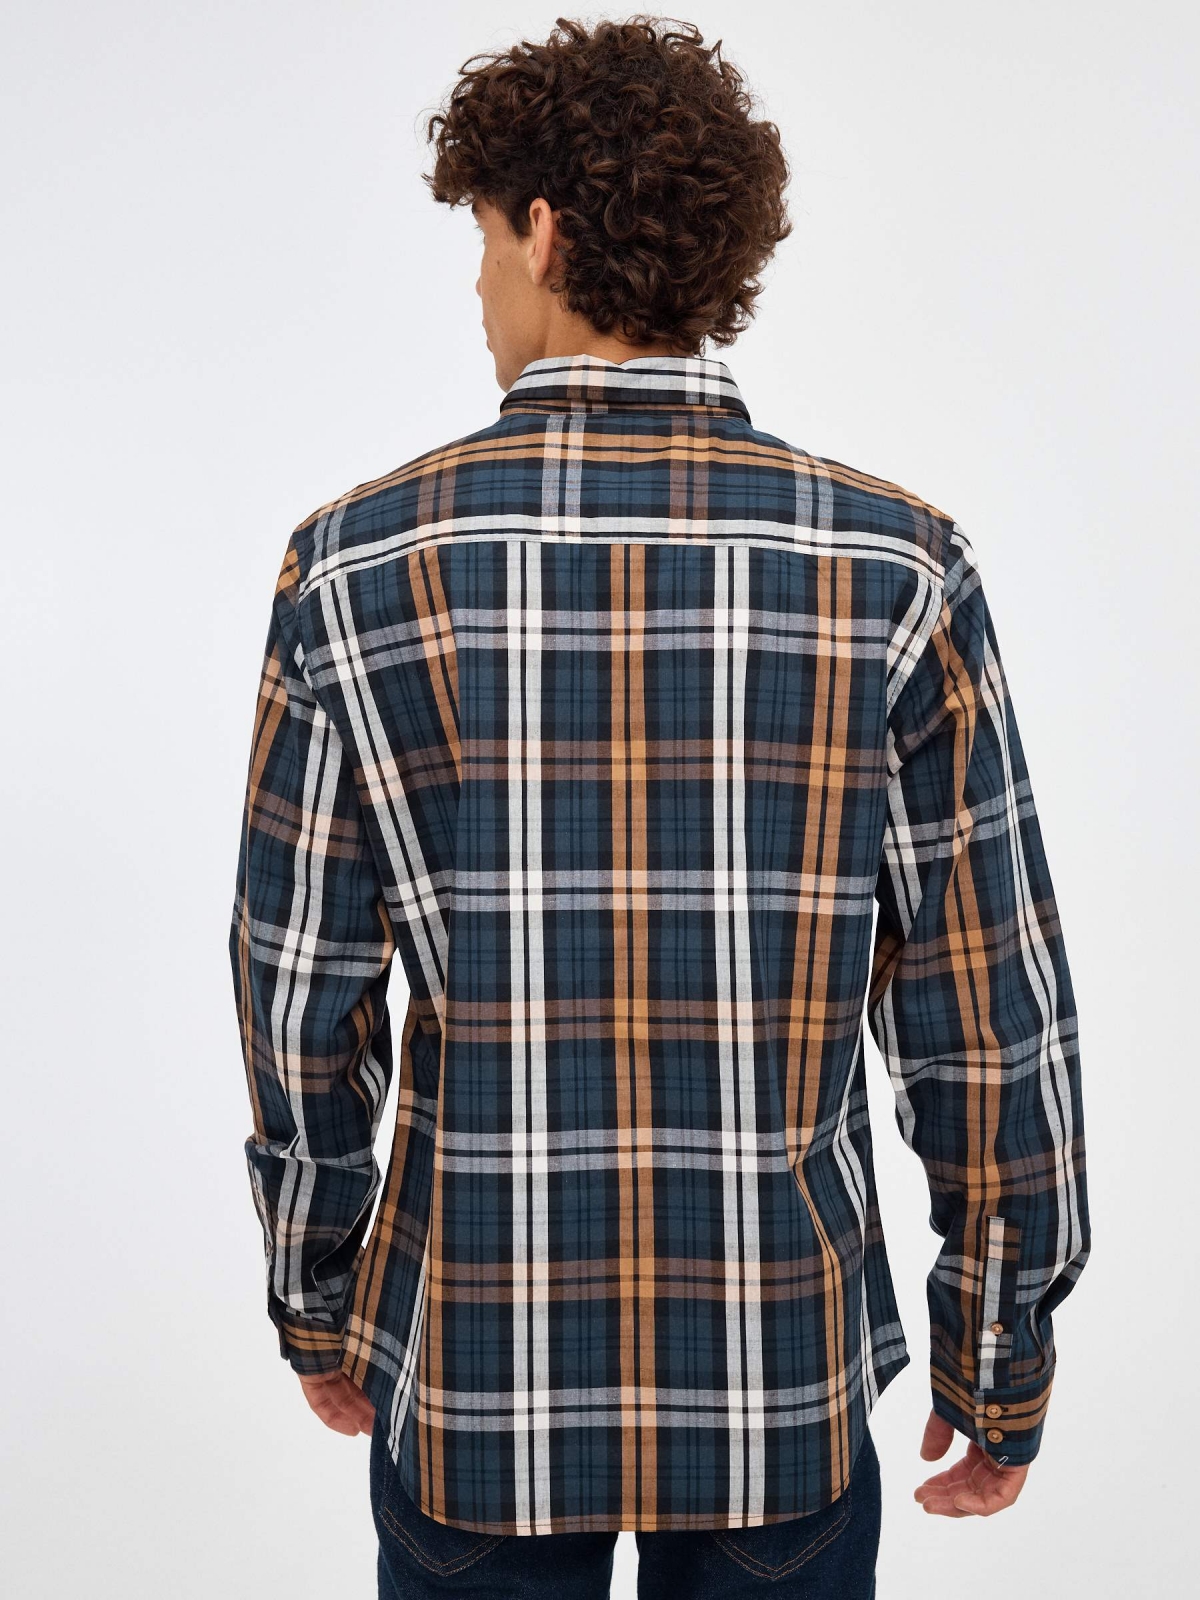 Blue and orange checkered shirt blue middle back view